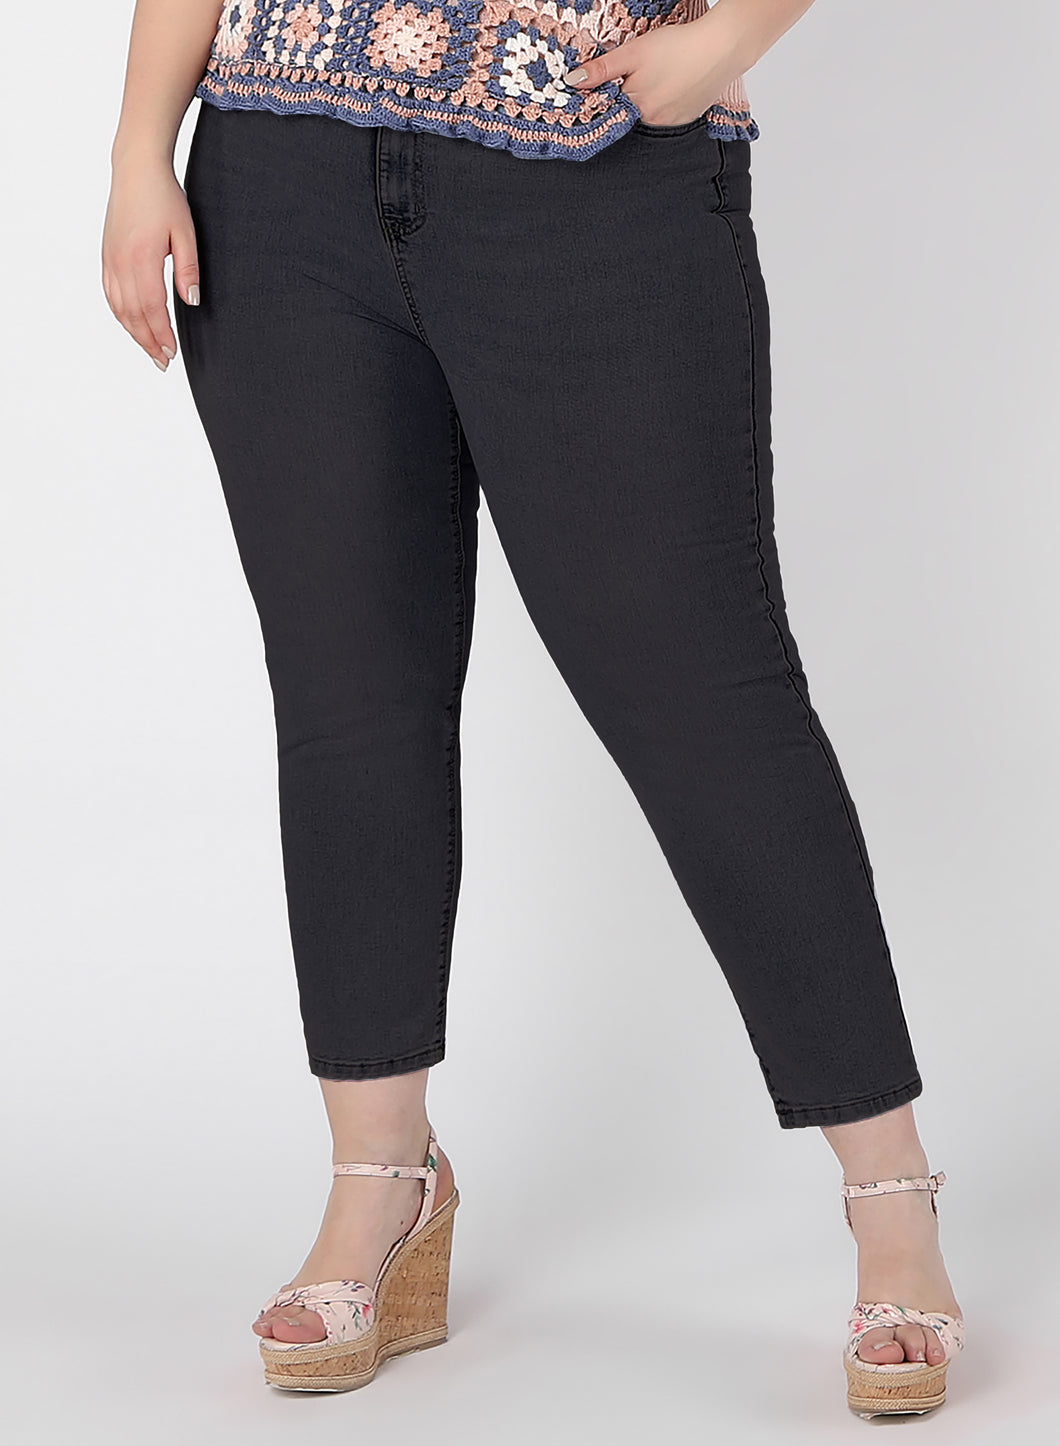 HIGH RISE STRAIGHT LEG JEAN in black by Dex (available in plus sizes)